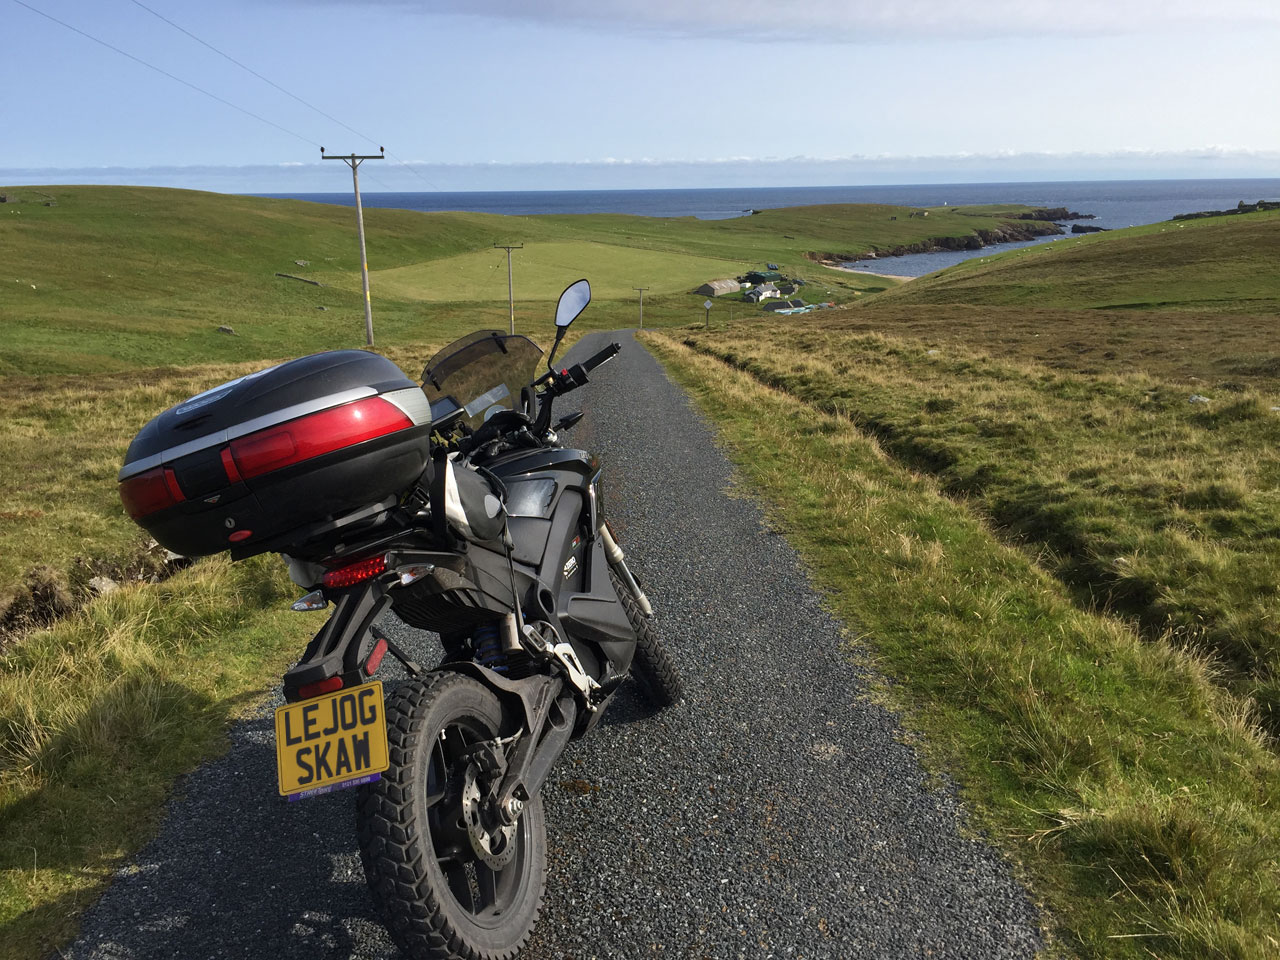 John Chivers' Zero DSR electric motorcycle on the approach to Skaw Beach and Britain's most northerly house on Unst, Shetland.